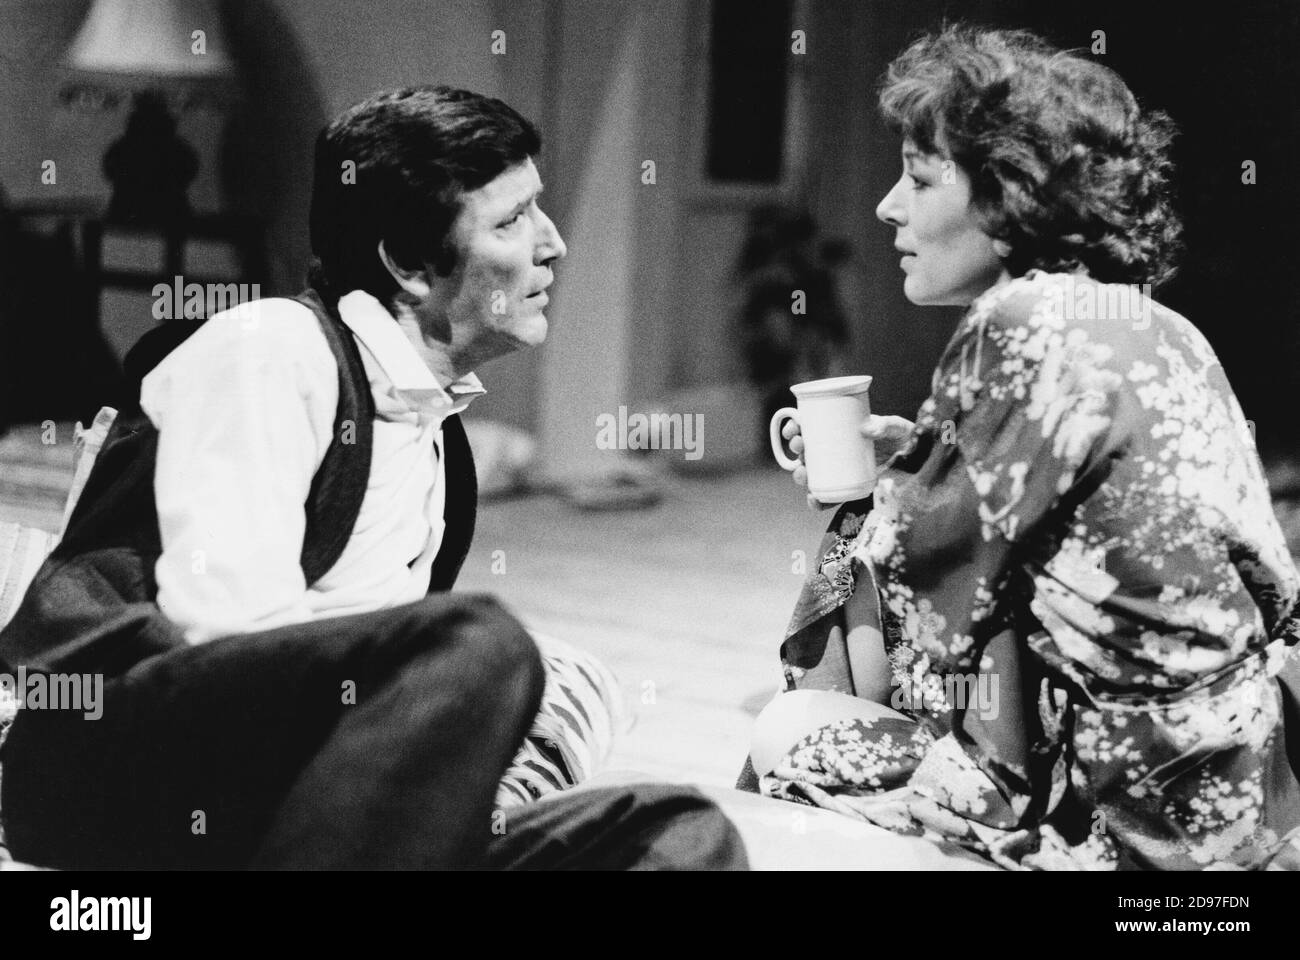 Tom Bell (Tom Fearon), Lynn Farleigh (Mary Fearon) in THE MAN WHO FELL IN LOVE WITH HIS WIFE by Ted Whitehead at the Lyric Hammersmith Studio, London W6  02/1984  design: Poppy Mitchell  lighting: Dave Horn  director: Peter James Stock Photo